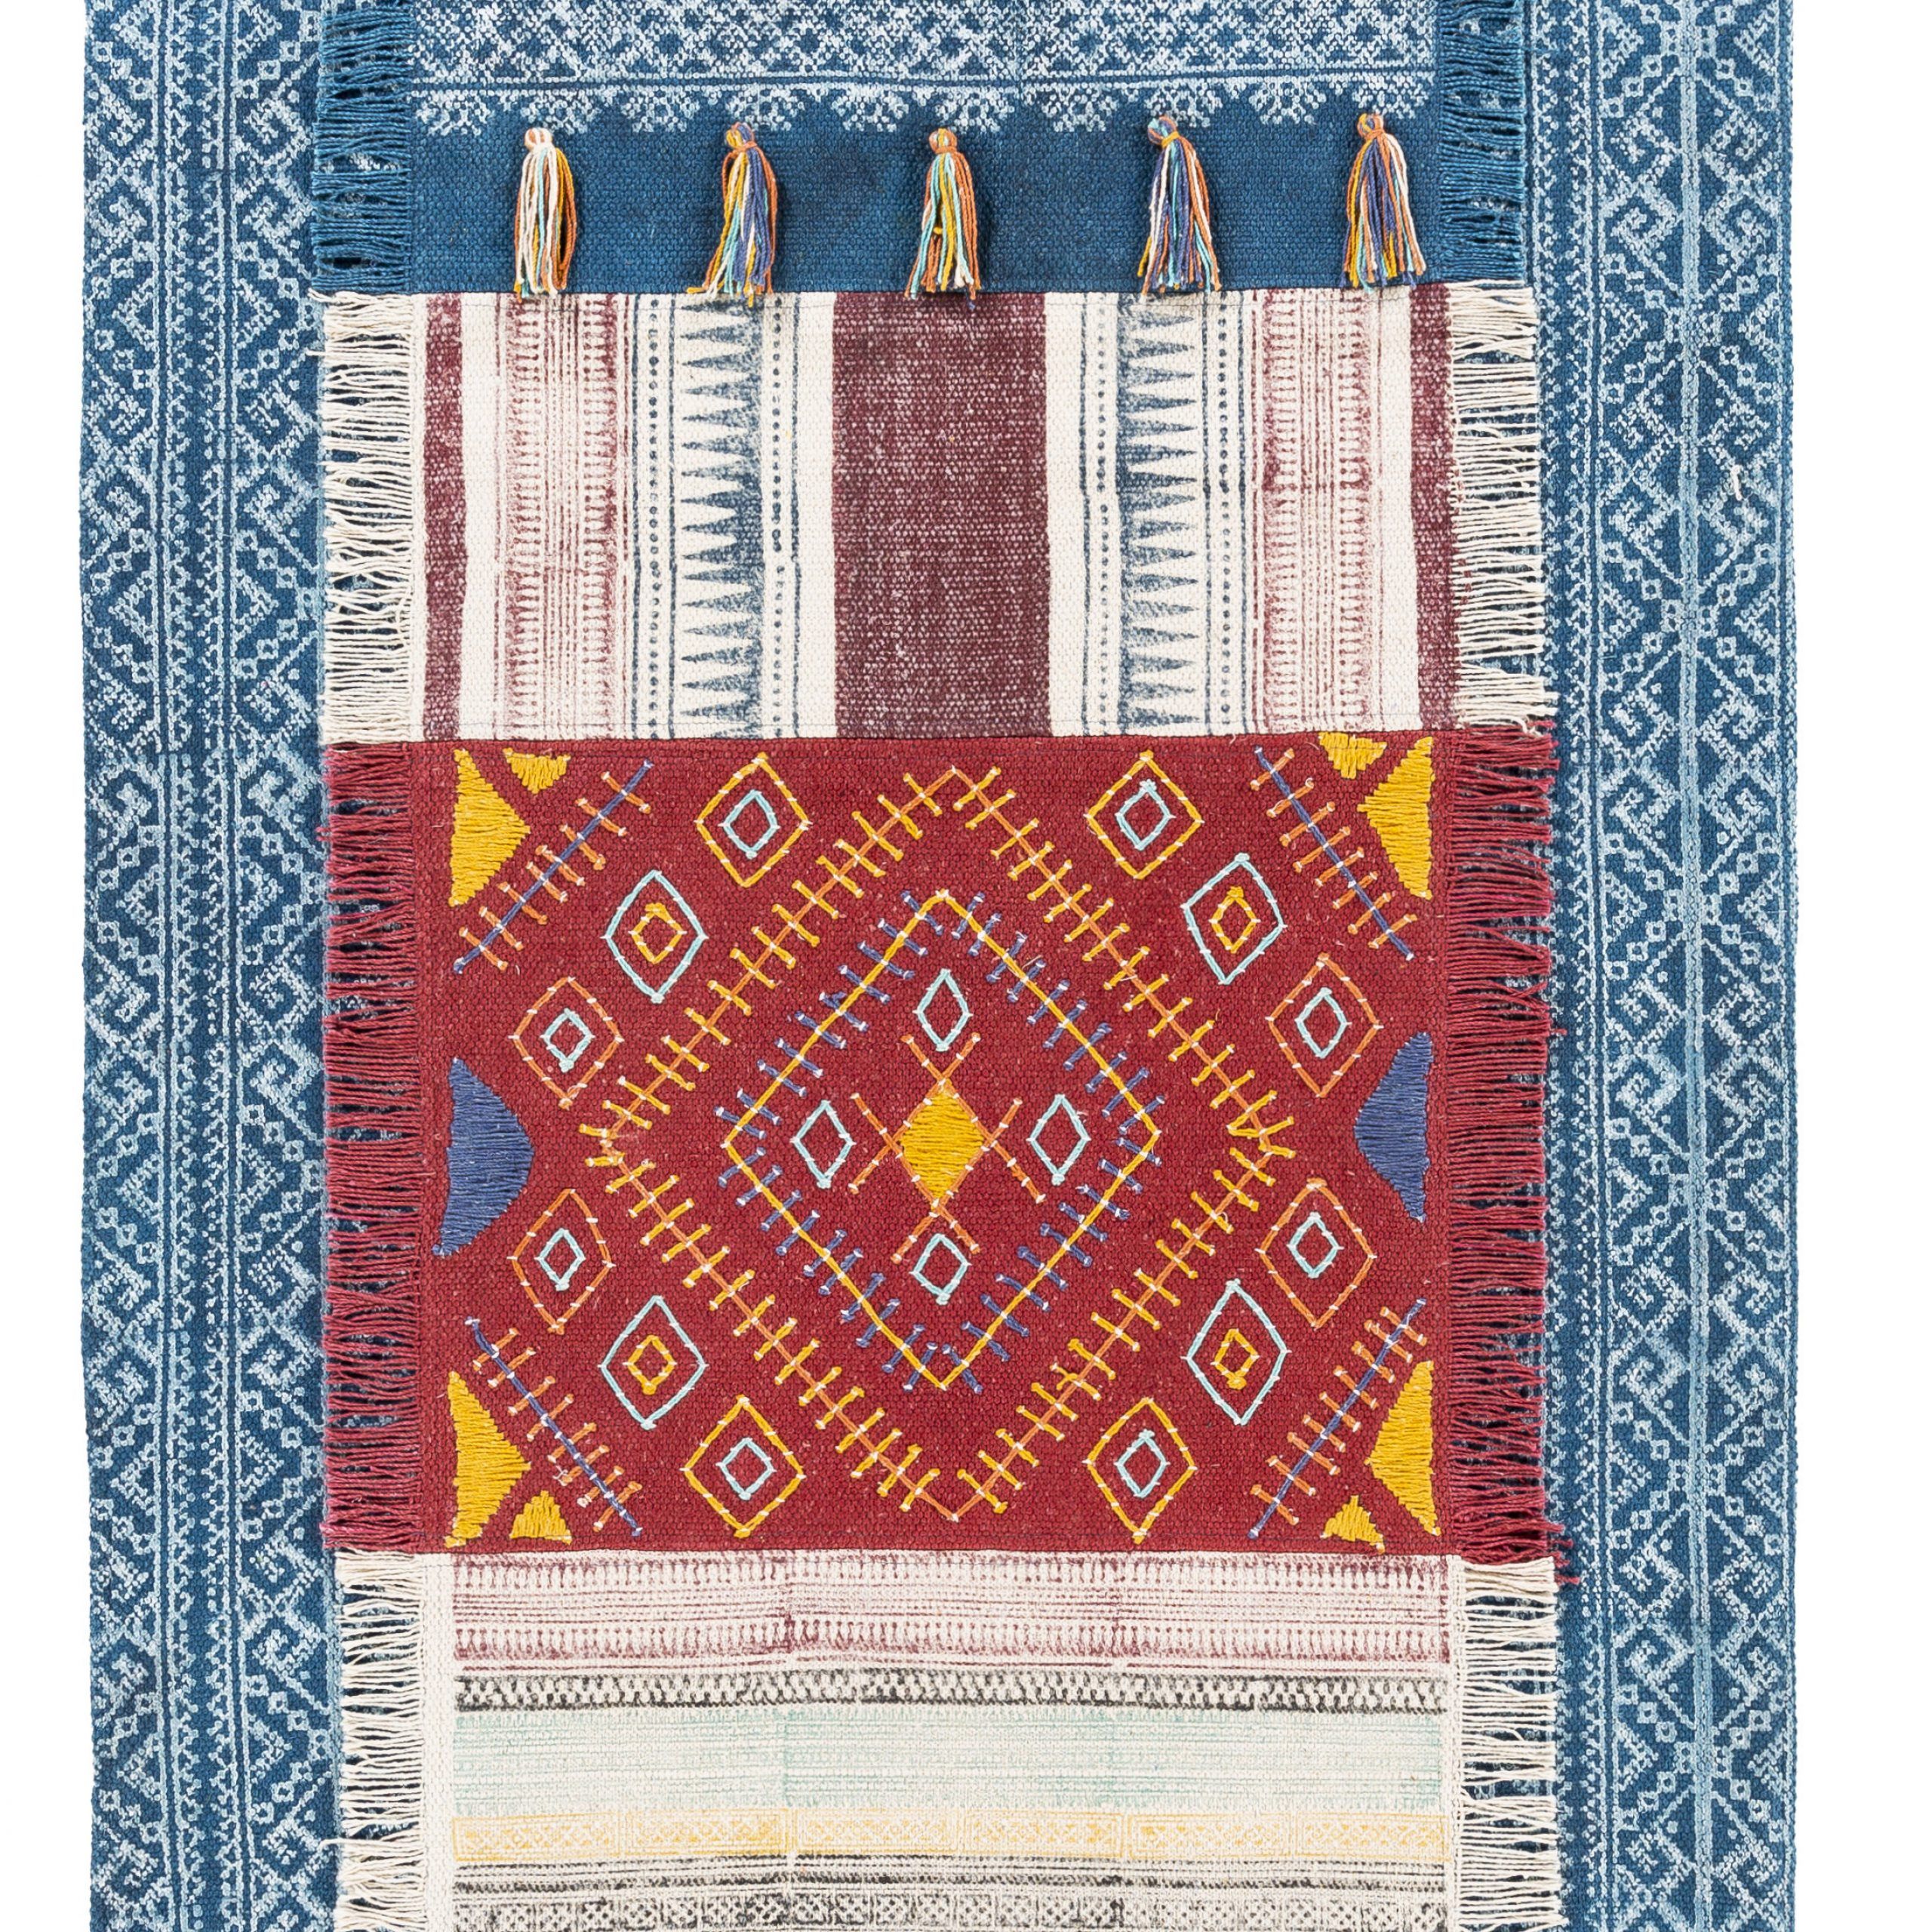 Most Recently Released Ranier Wall Hanging With Hanging Accessories Included Within Blended Fabric Teresina Wool And Viscose Wall Hangings With Hanging Accessories Included (View 4 of 20)